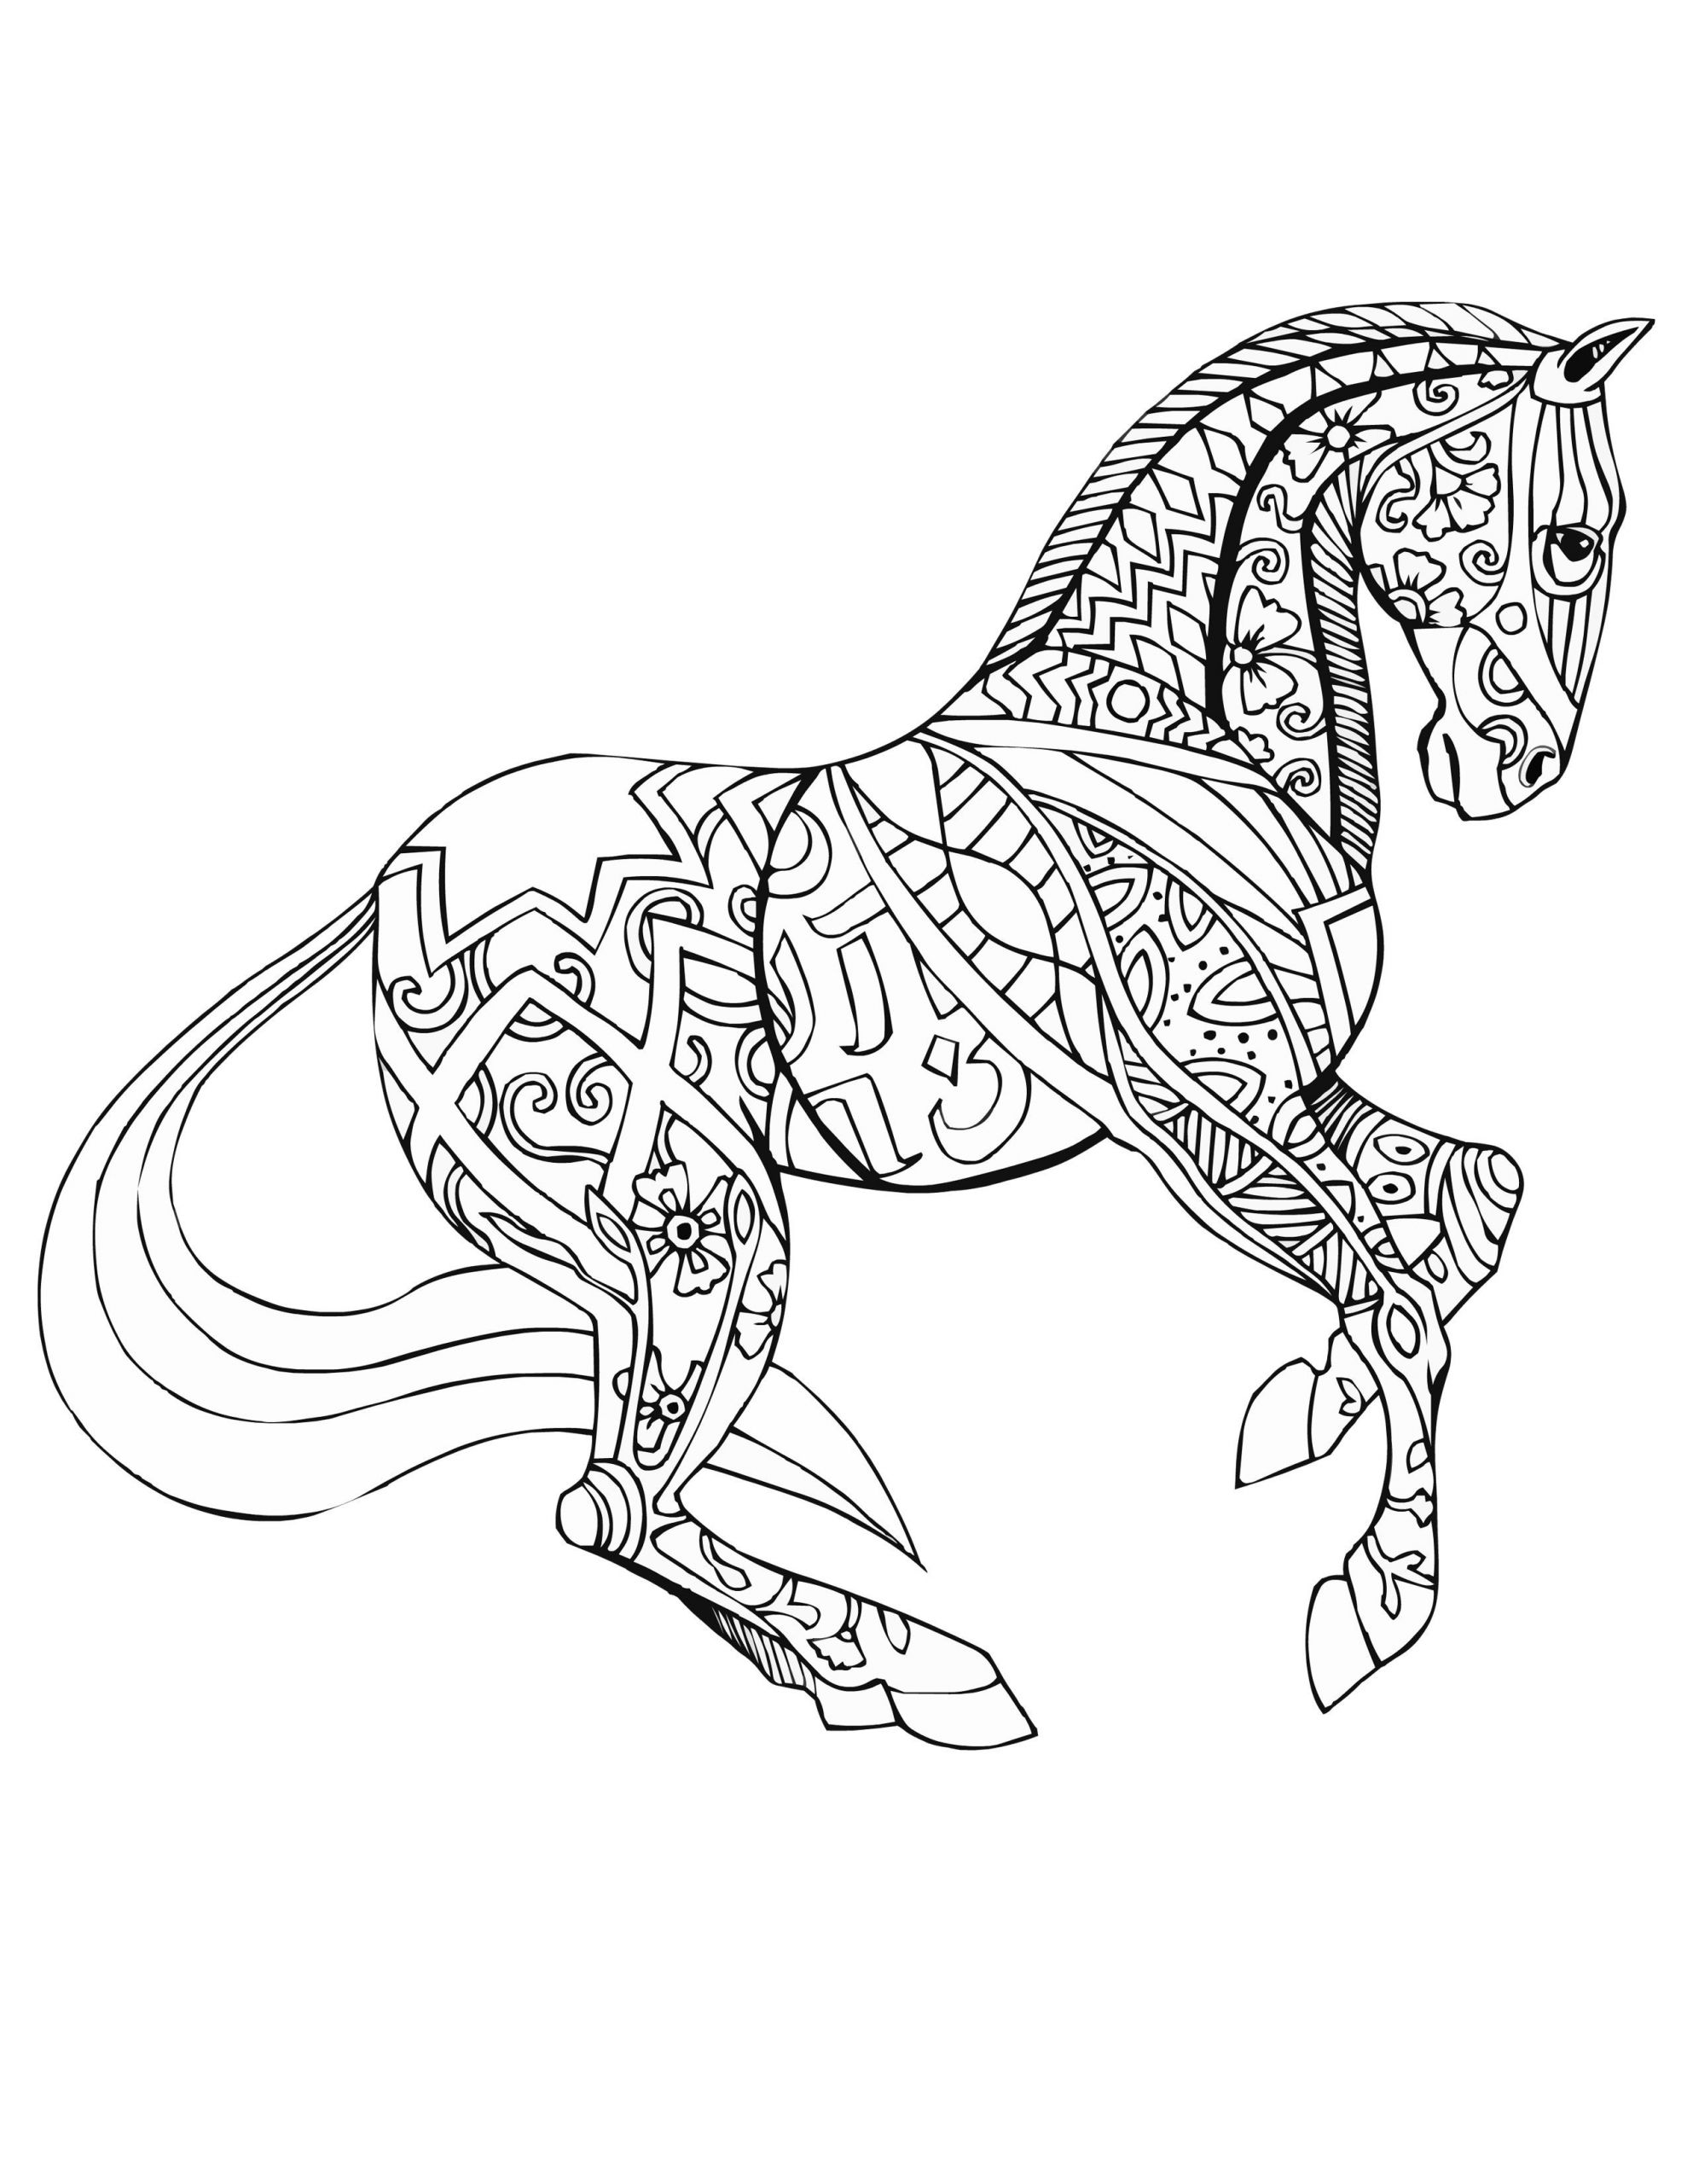 Horse Coloring Pages For Adults
 Horse free Selah Works …